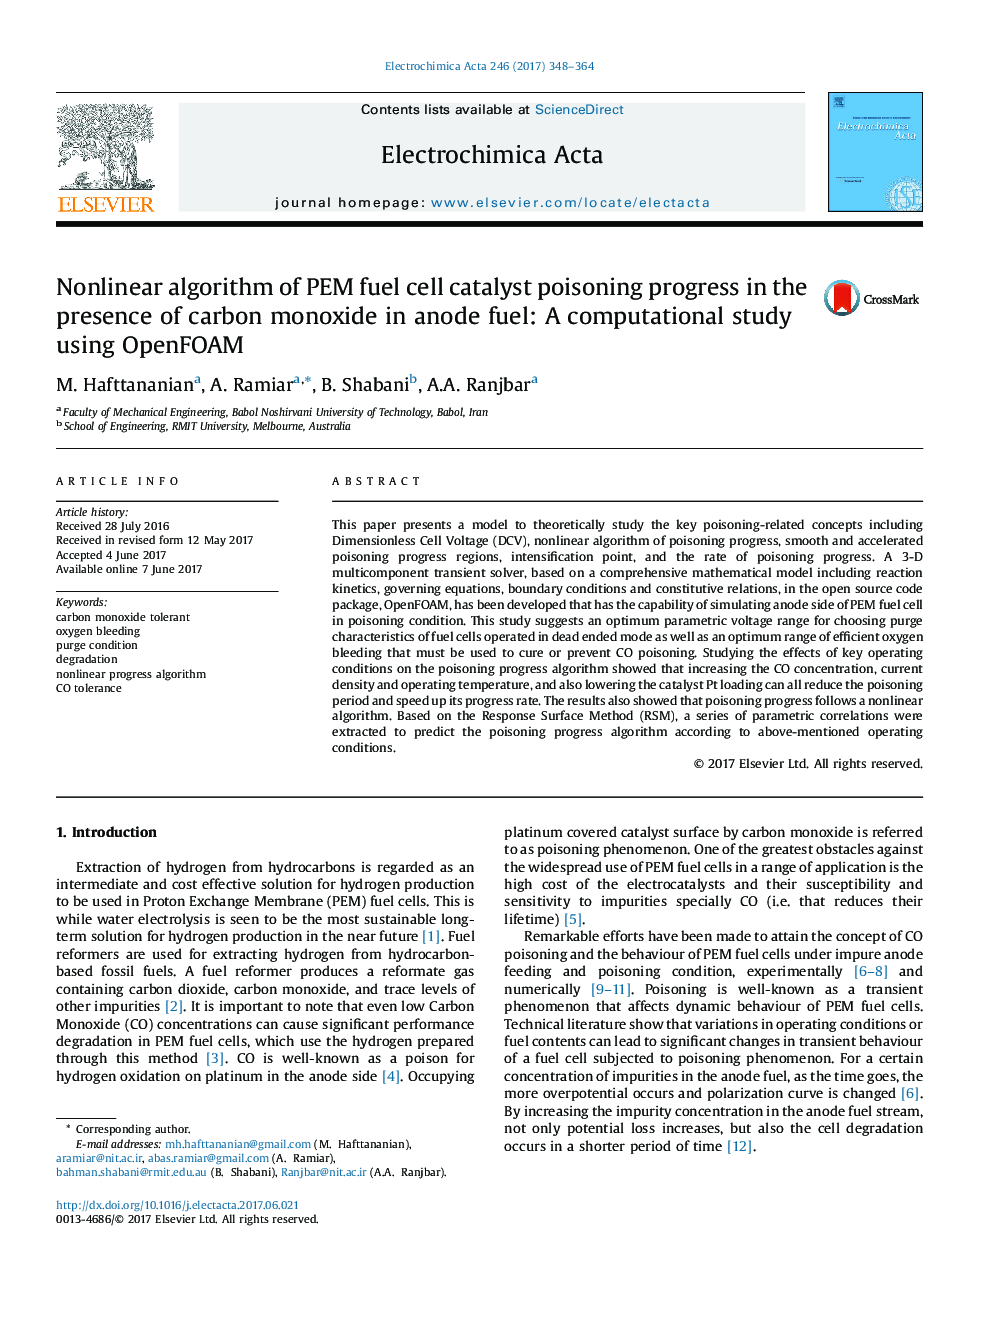 Nonlinear algorithm of PEM fuel cell catalyst poisoning progress in the presence of carbon monoxide in anode fuel: A computational study using OpenFOAM